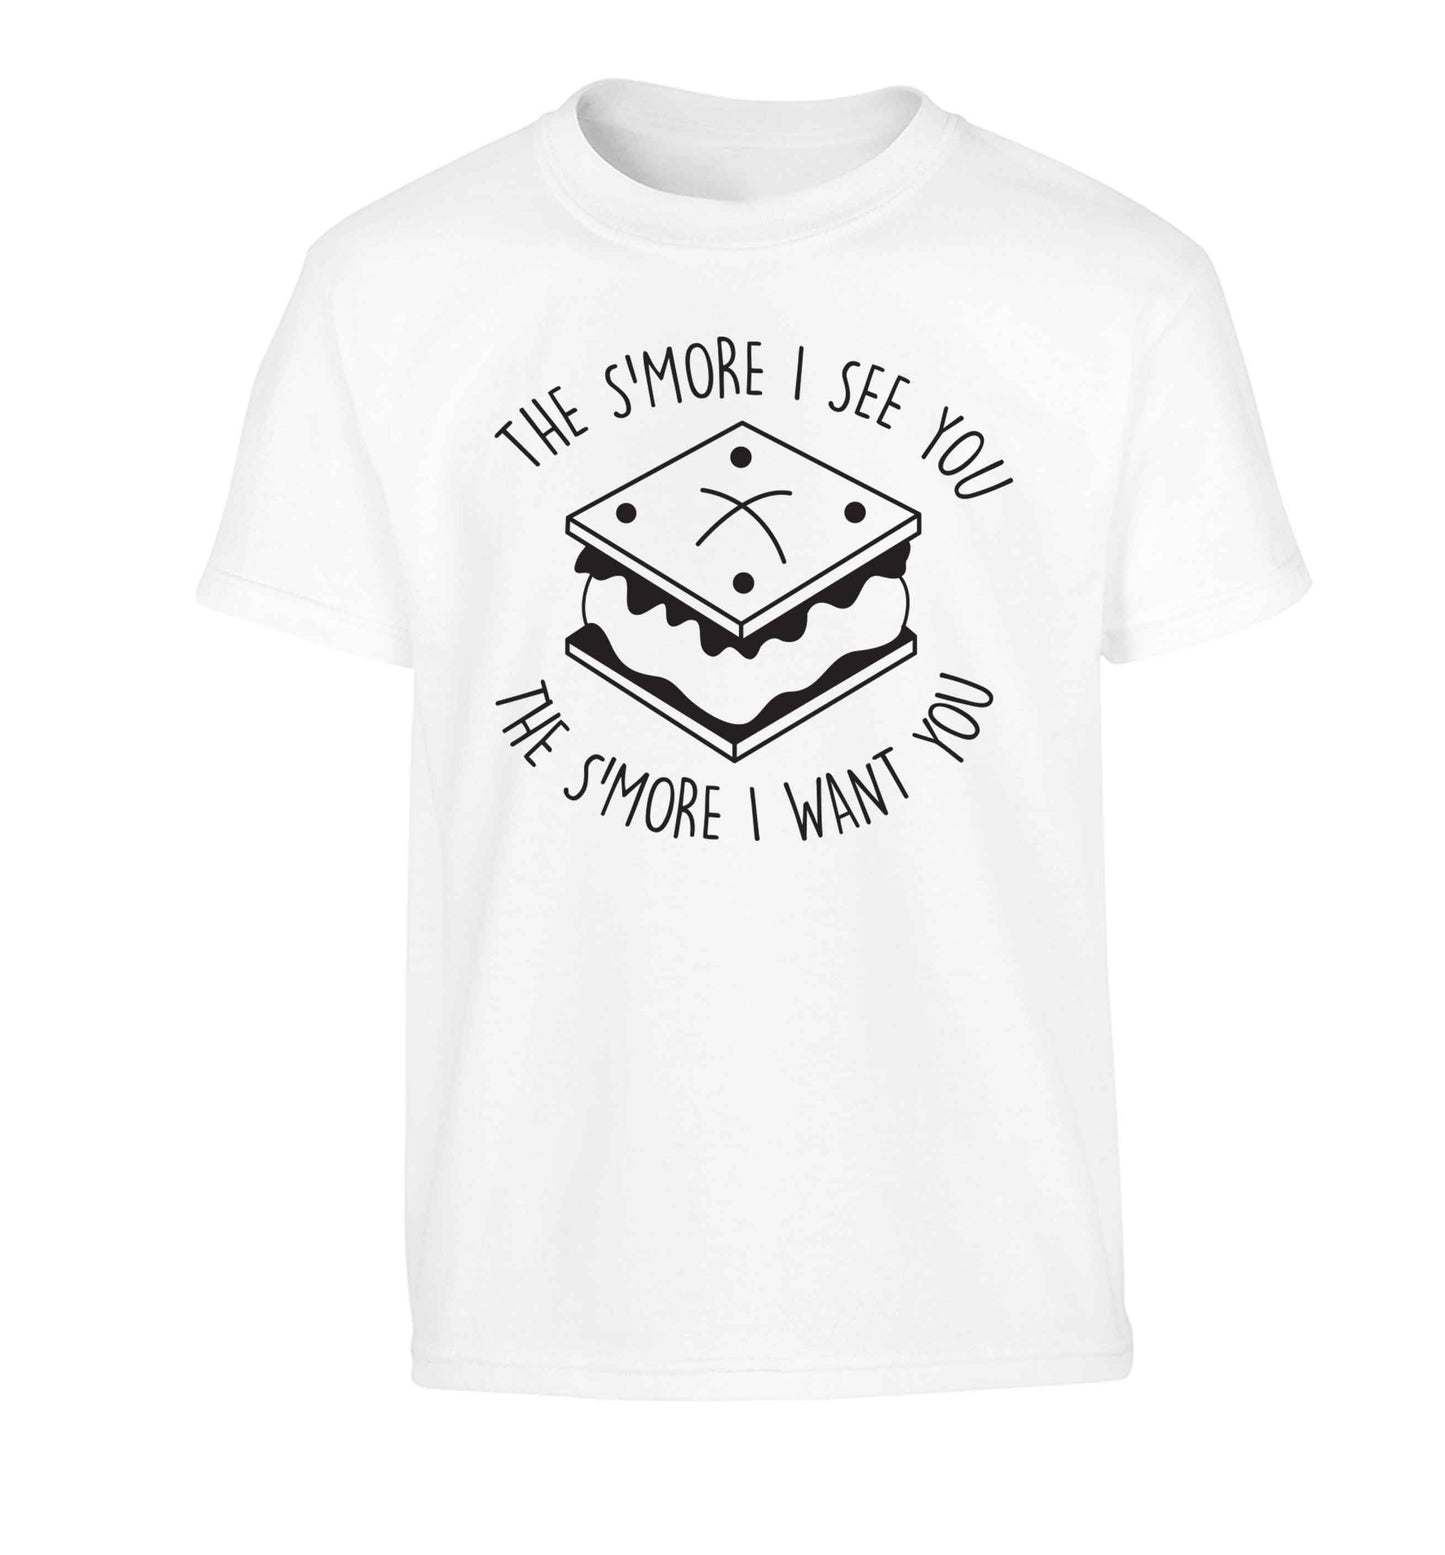 The s'more I see you the s'more I want you Children's white Tshirt 12-13 Years